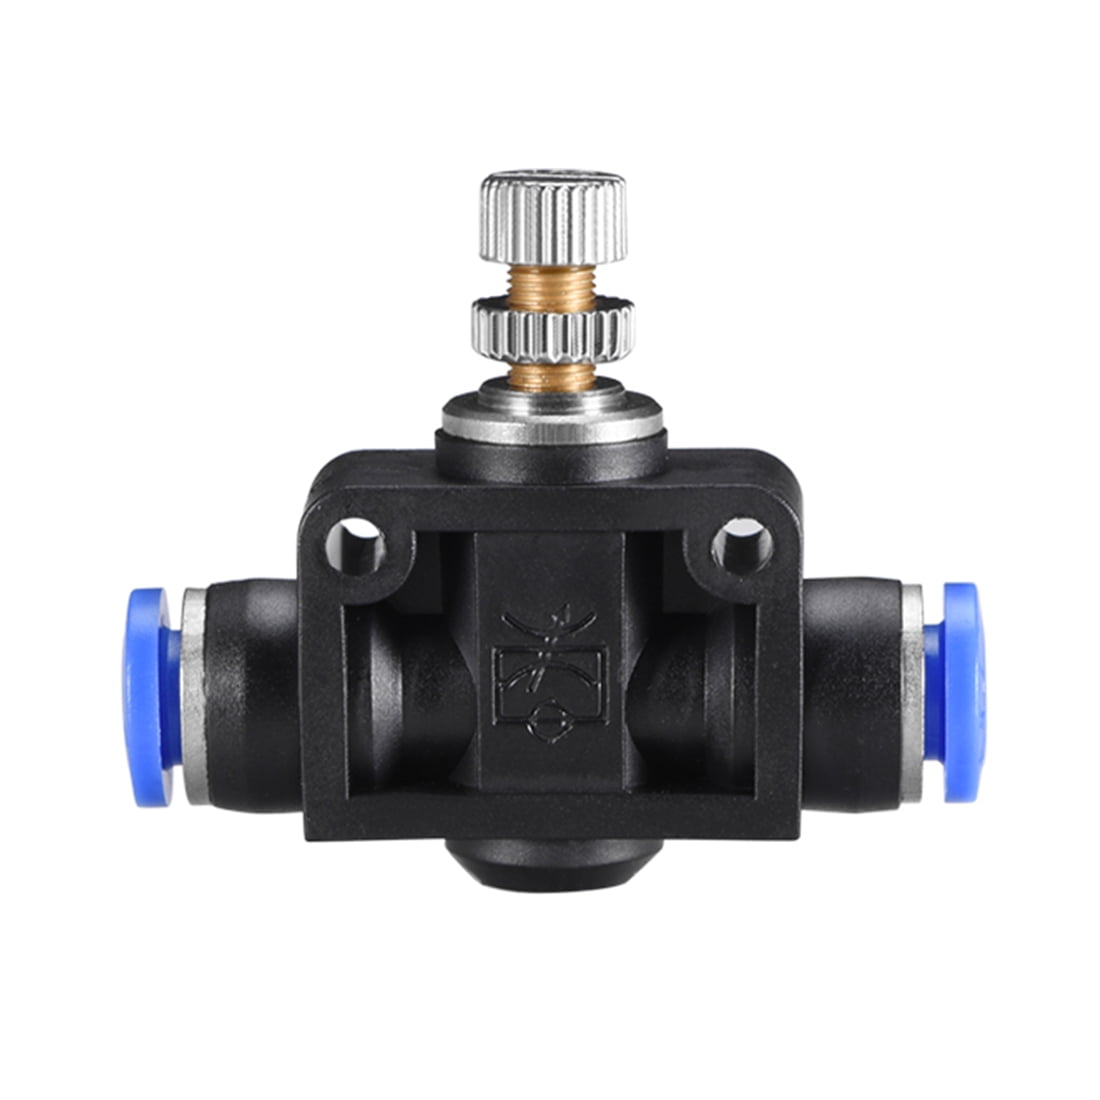 Avanty Air Flow Control Valve with Push-to-Connect Fitting Pack of 5 in-Line Speed Controller Union Straight 6mm OD x 6mm OD 